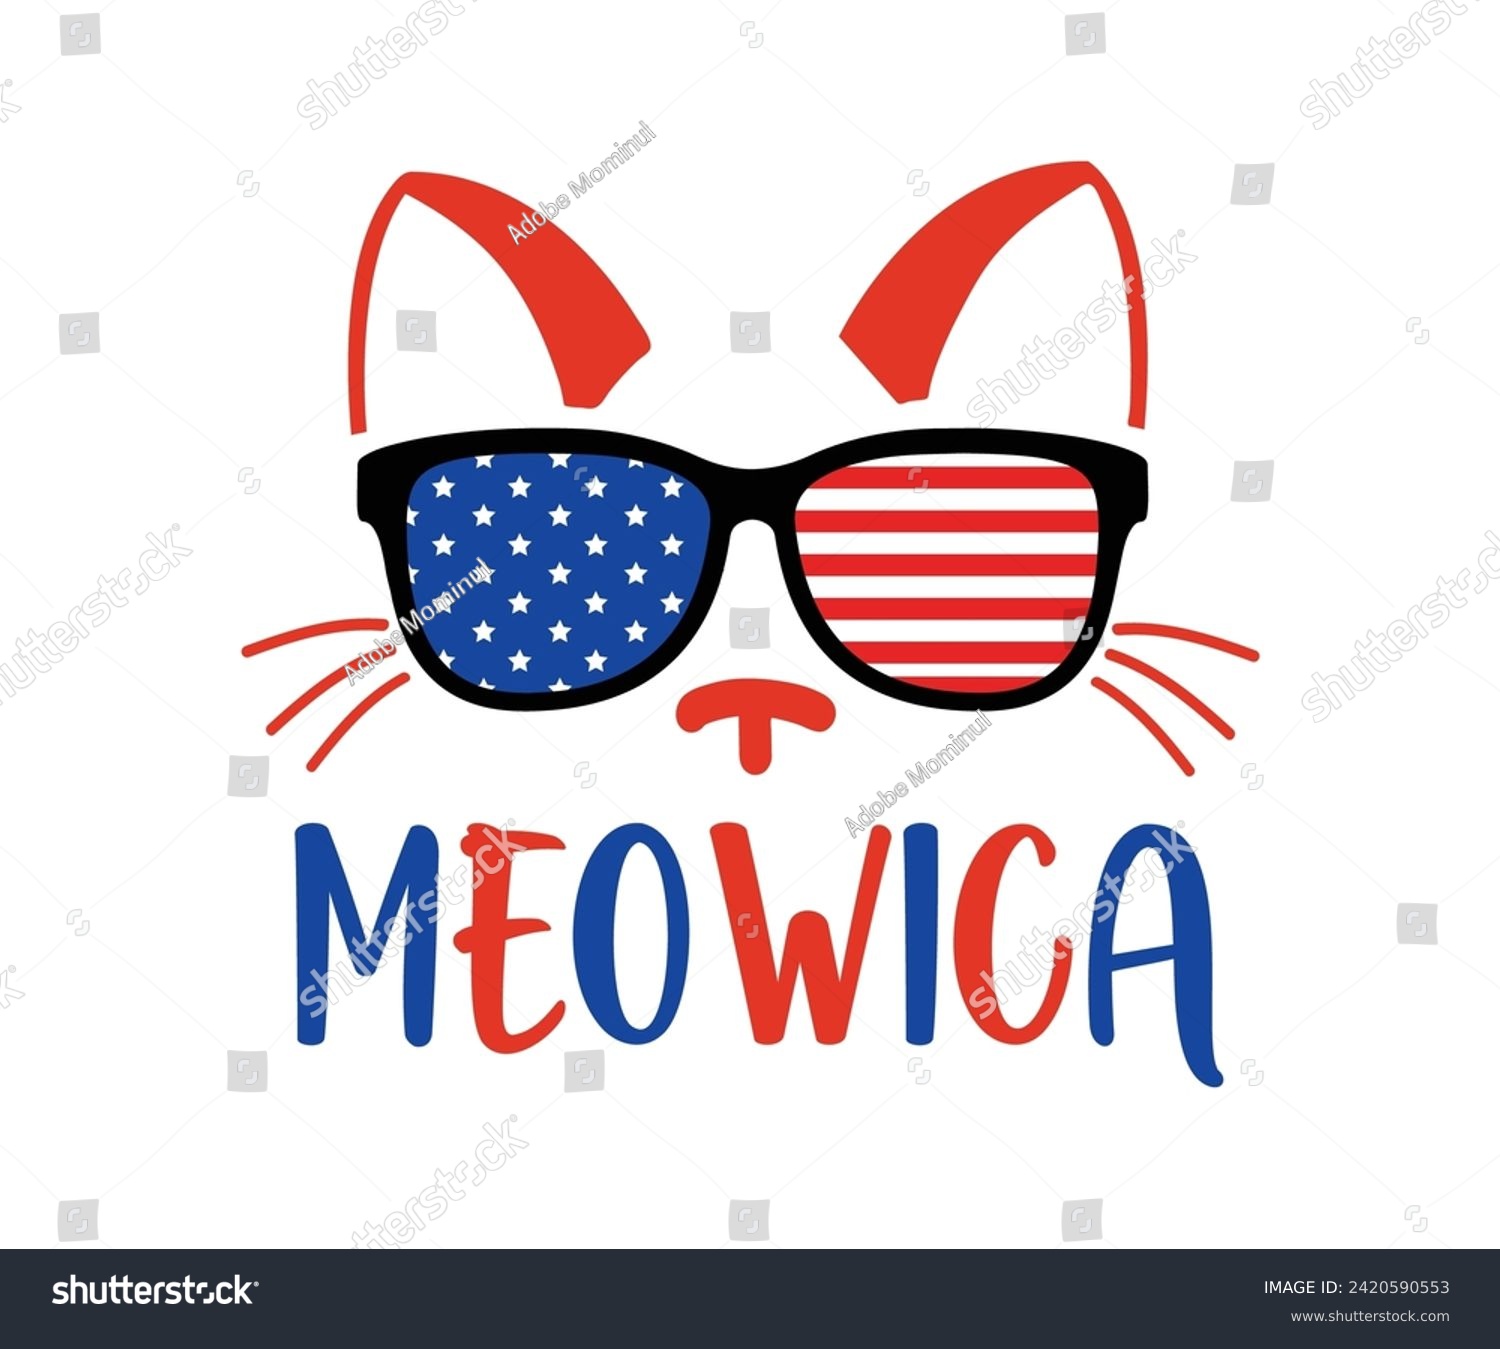 SVG of Meowica Svg,Independence Day,Patriot Svg,4th of July Svg,America Svg,USA Flag Svg,4th of July Quotes,Freedom Shirt,Memorial Day,Svg Cut Files,USA T-shirt,American Flag, svg